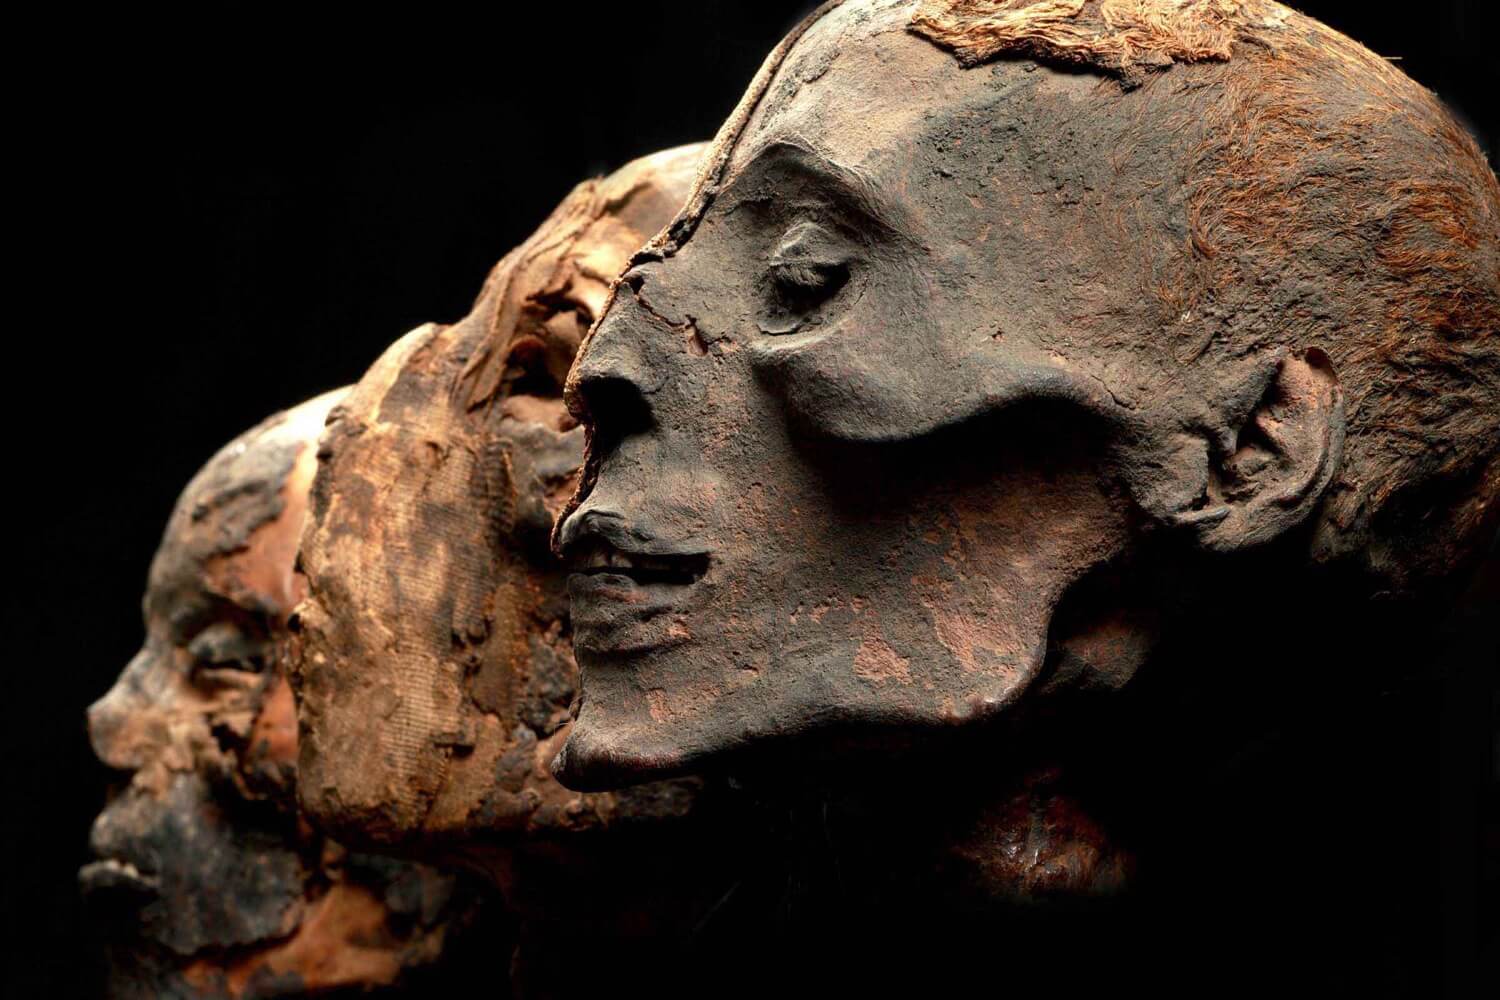 The ancient Egyptians created mummies long before the pharaohs